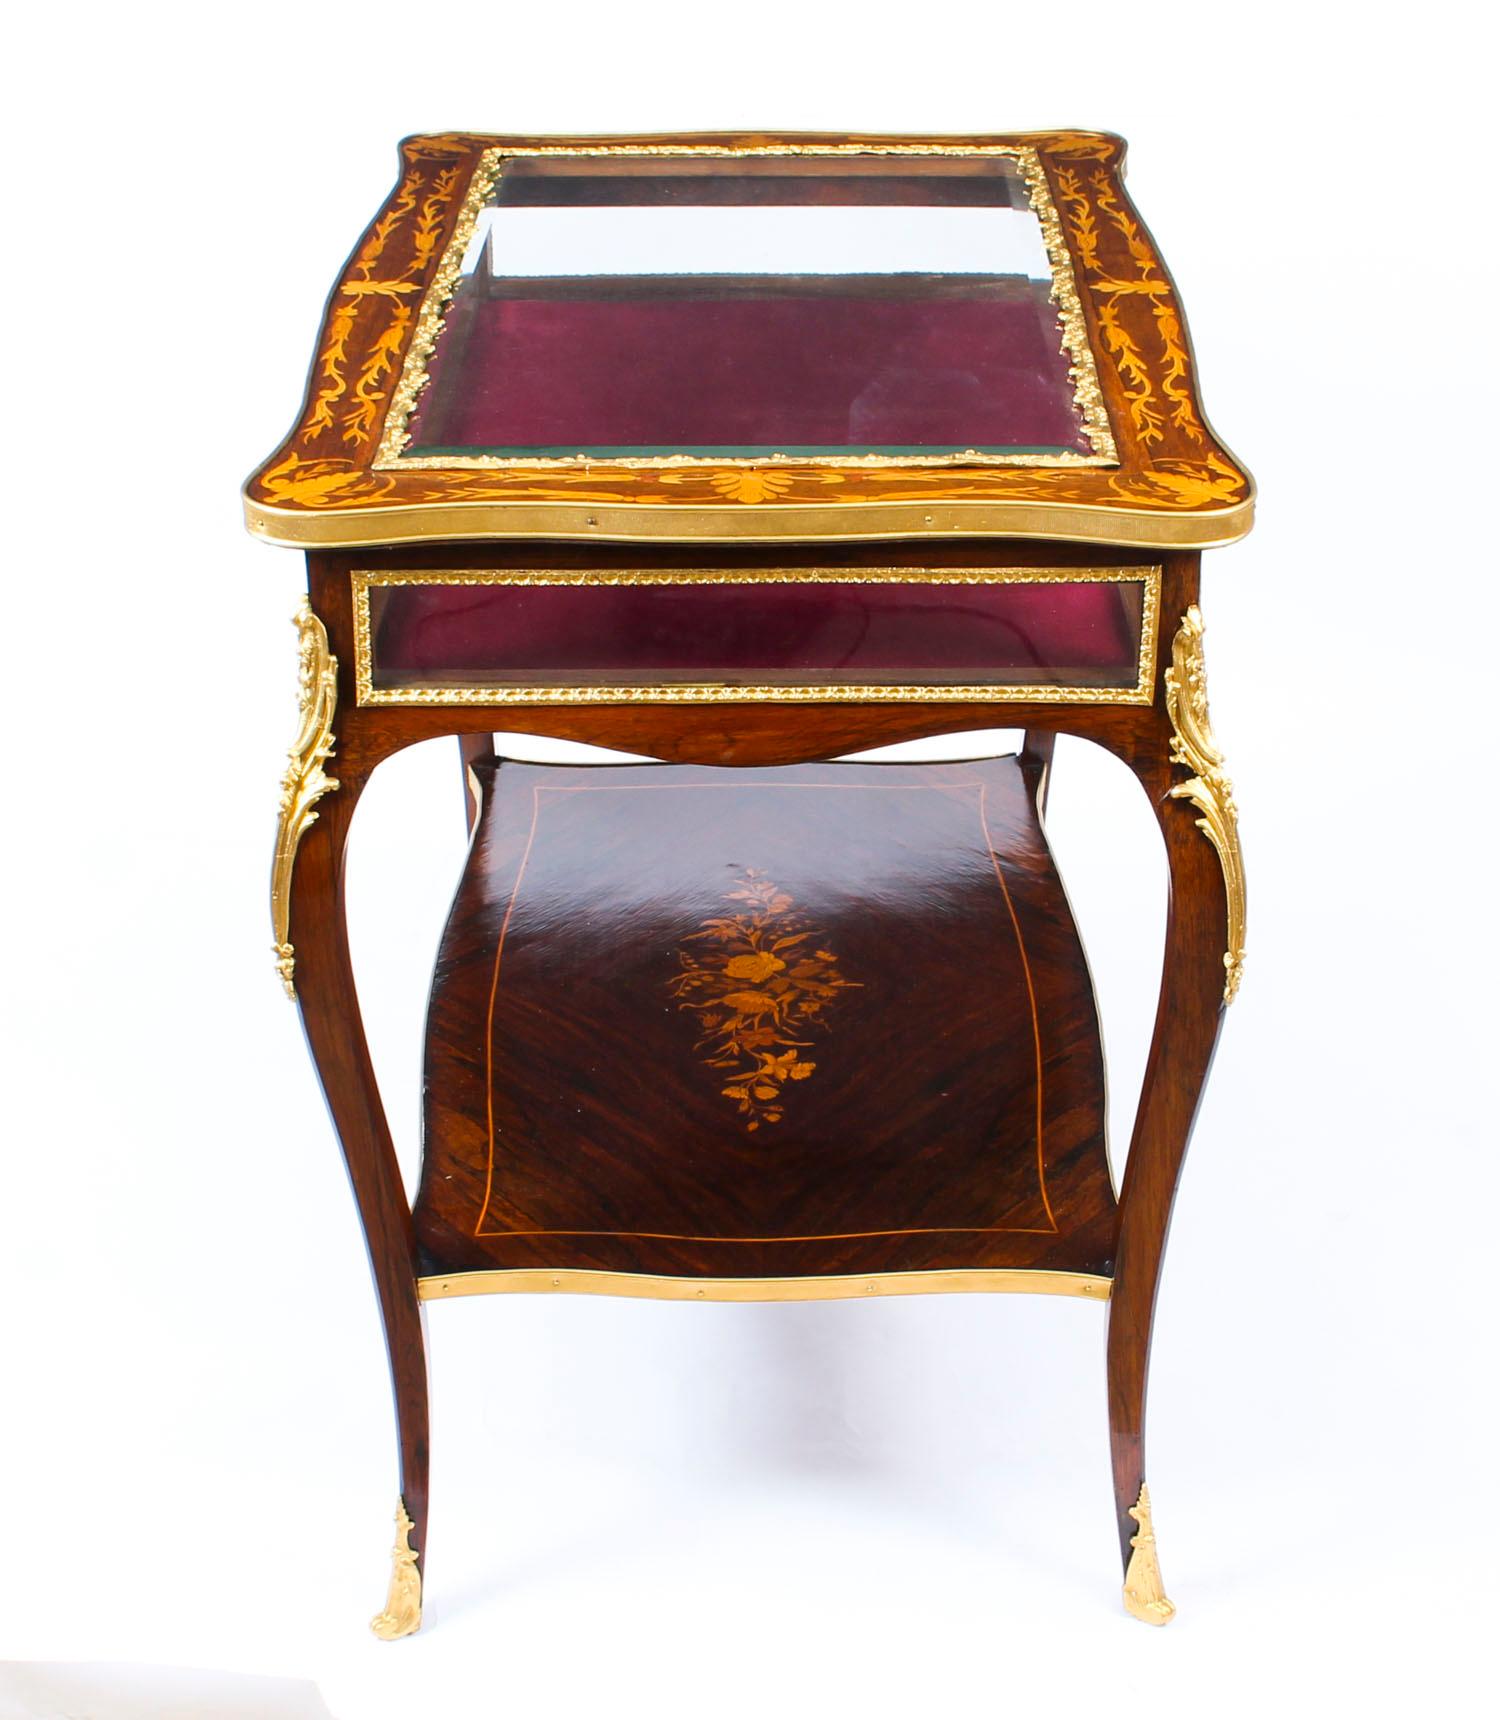 Antique French Ormolu-Mounted Marquetry Bijouterie Display Table, 19th Century 5